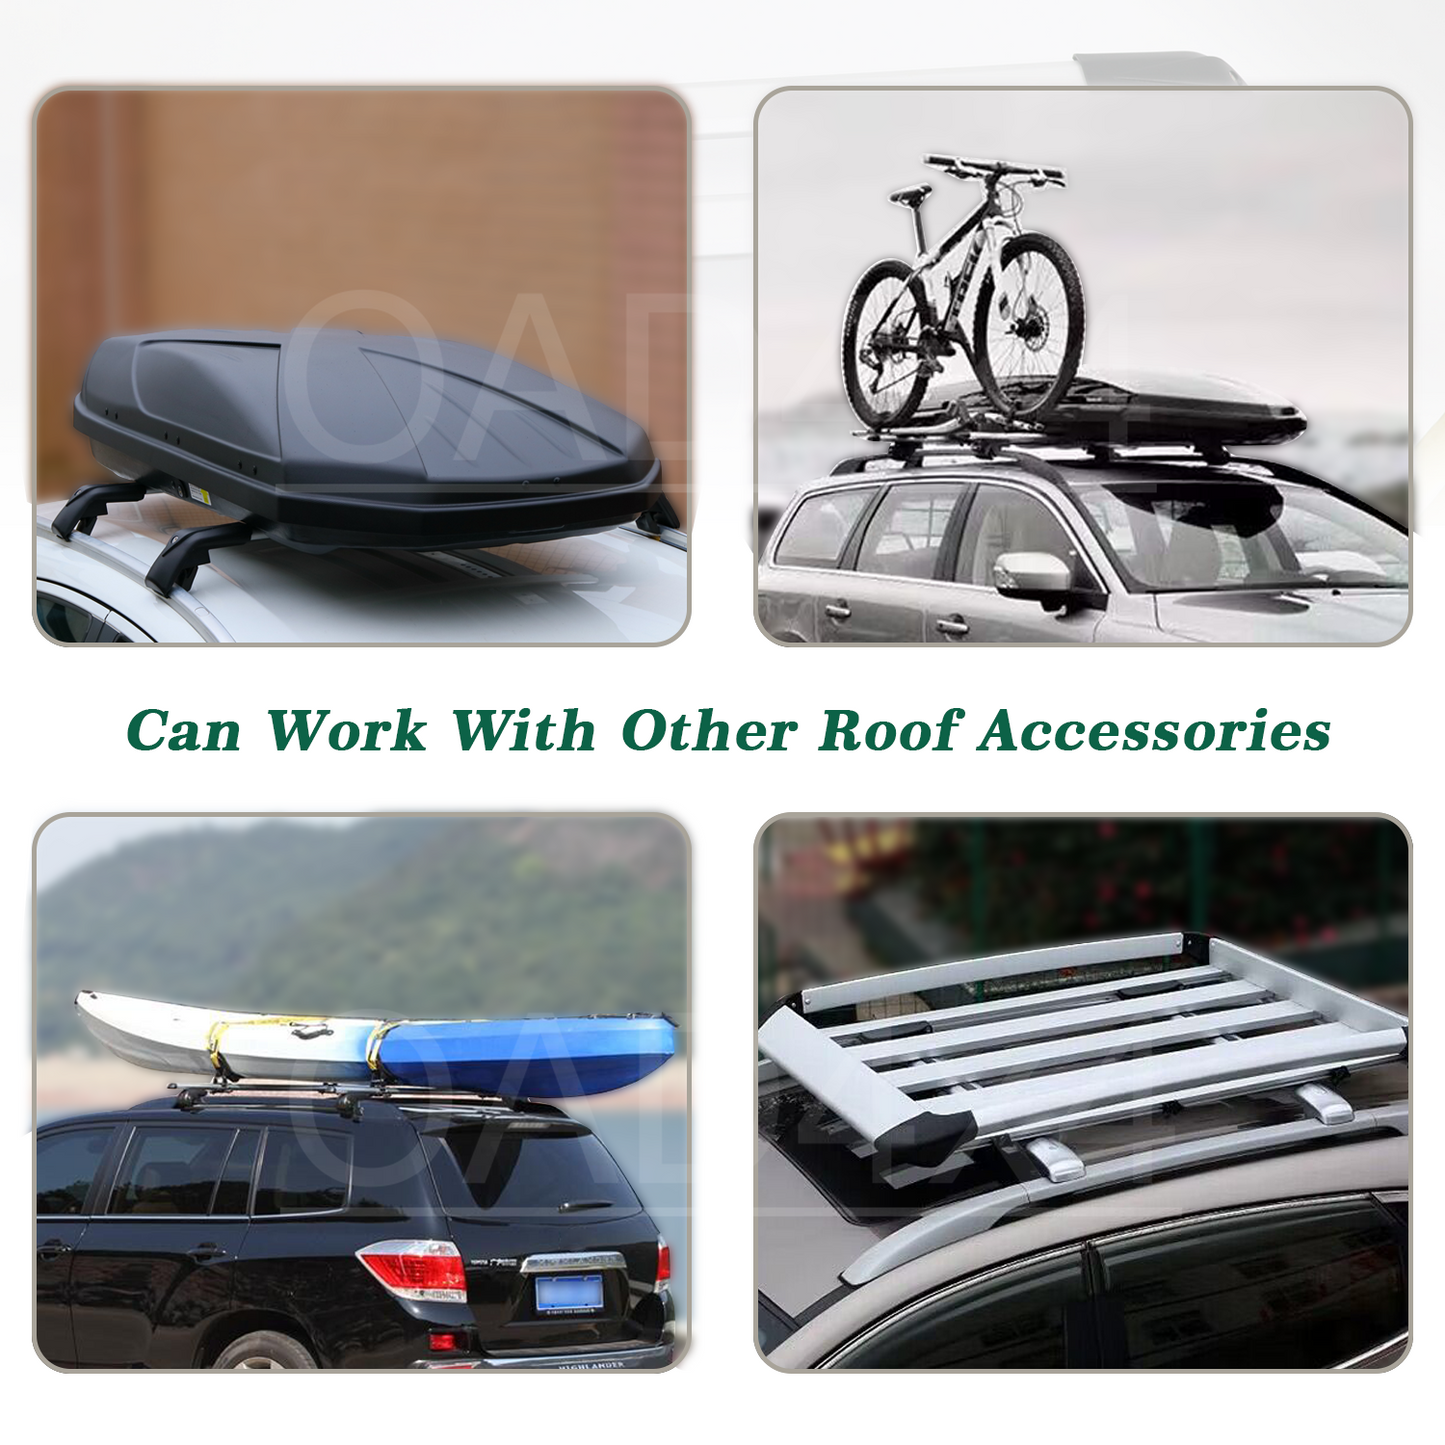 OAD 1 pair Aluminum Silver Cross Bar Roof Racks Baggage holder for Ford Kuga 13-16 with raised roof rail